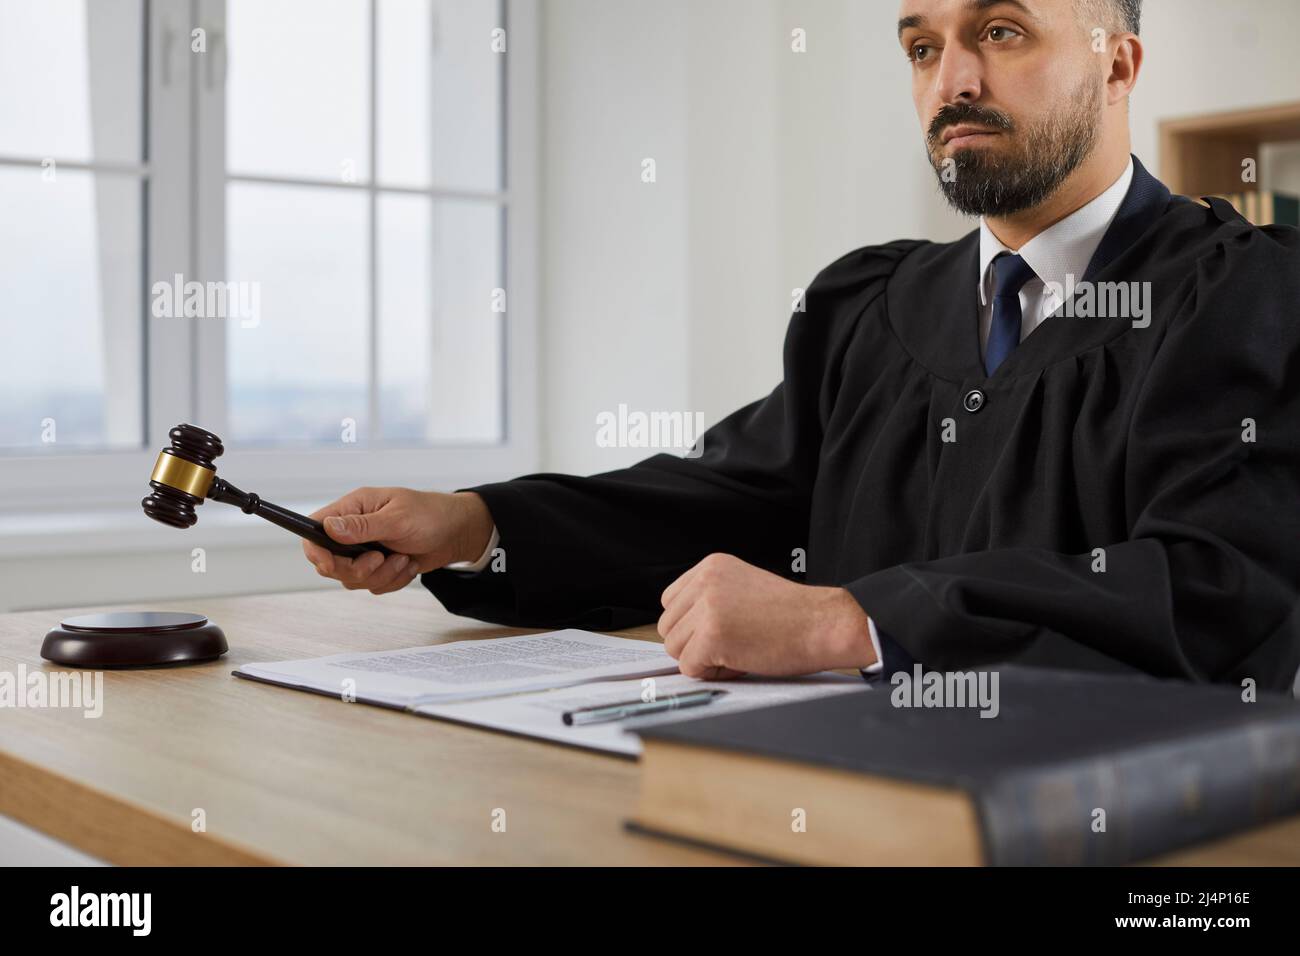 Fair serious male judge passes sentence and decides to close case during court hearing. Stock Photo